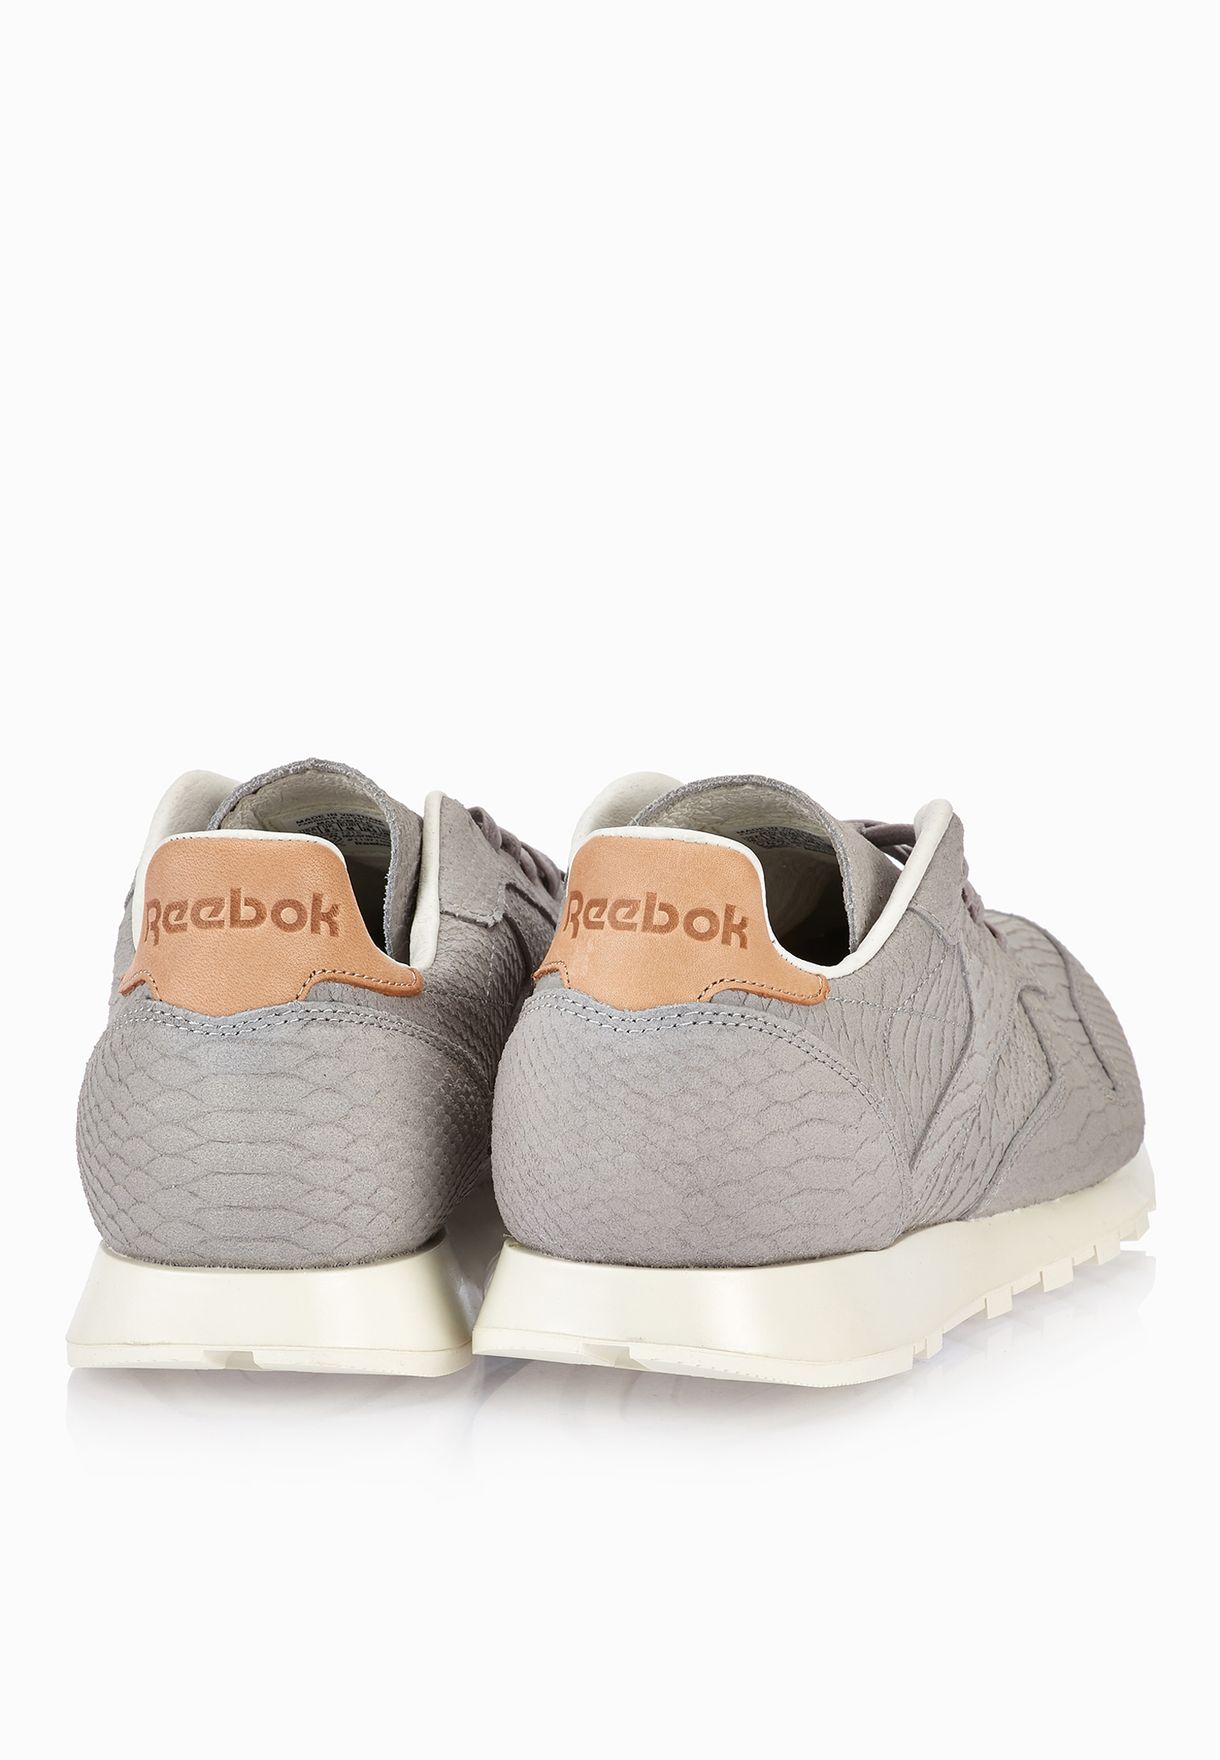 reebok classic leather clean lux v69680